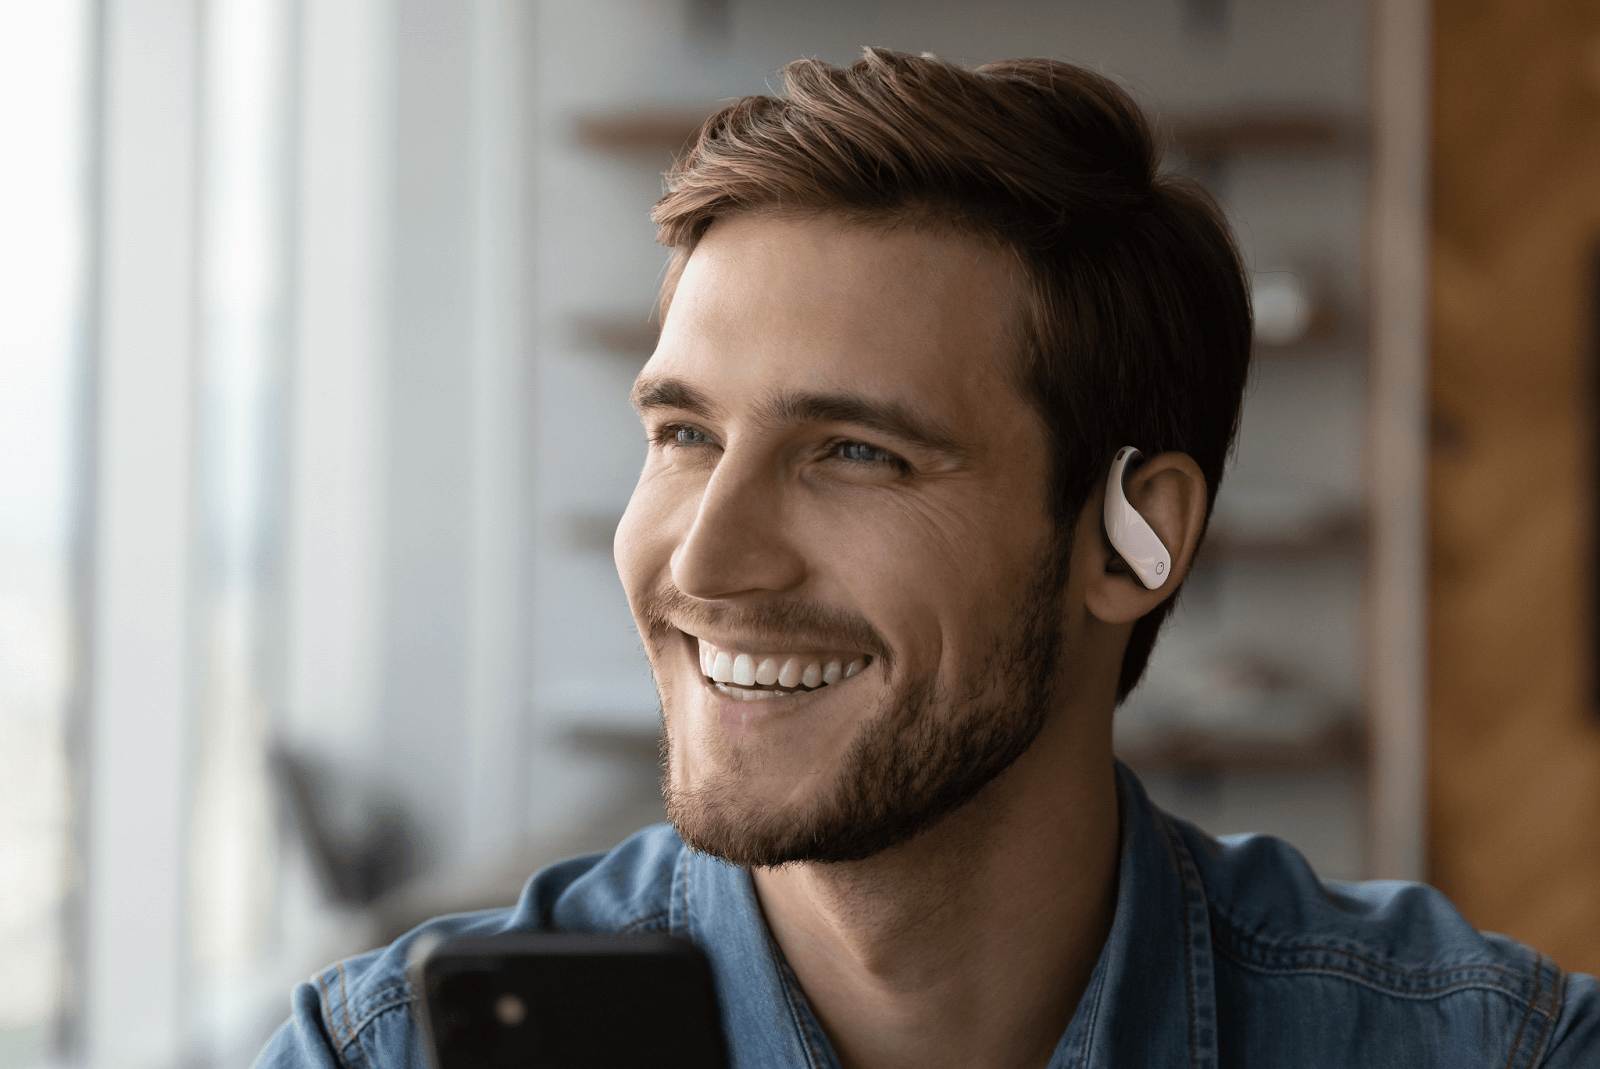 Olive Union Olive Max true wireless earbuds and hearing aids